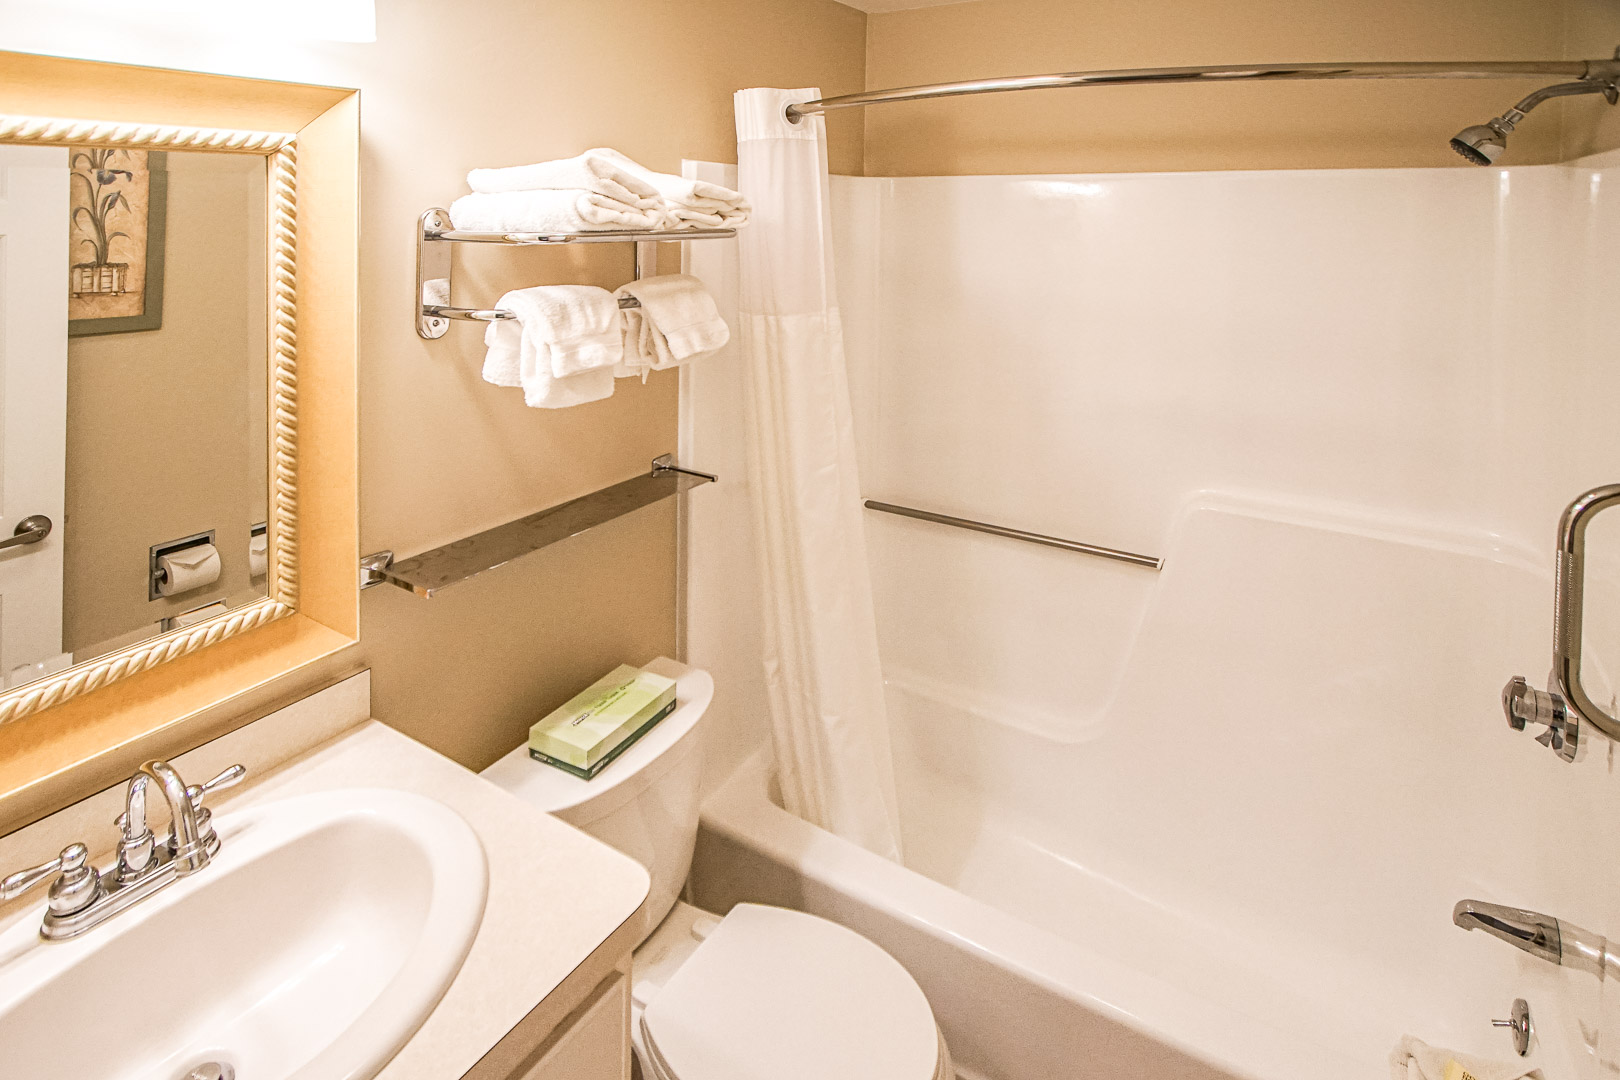 A clean and standard bathroom at VRI's Cape Winds Resort in Massachusetts.